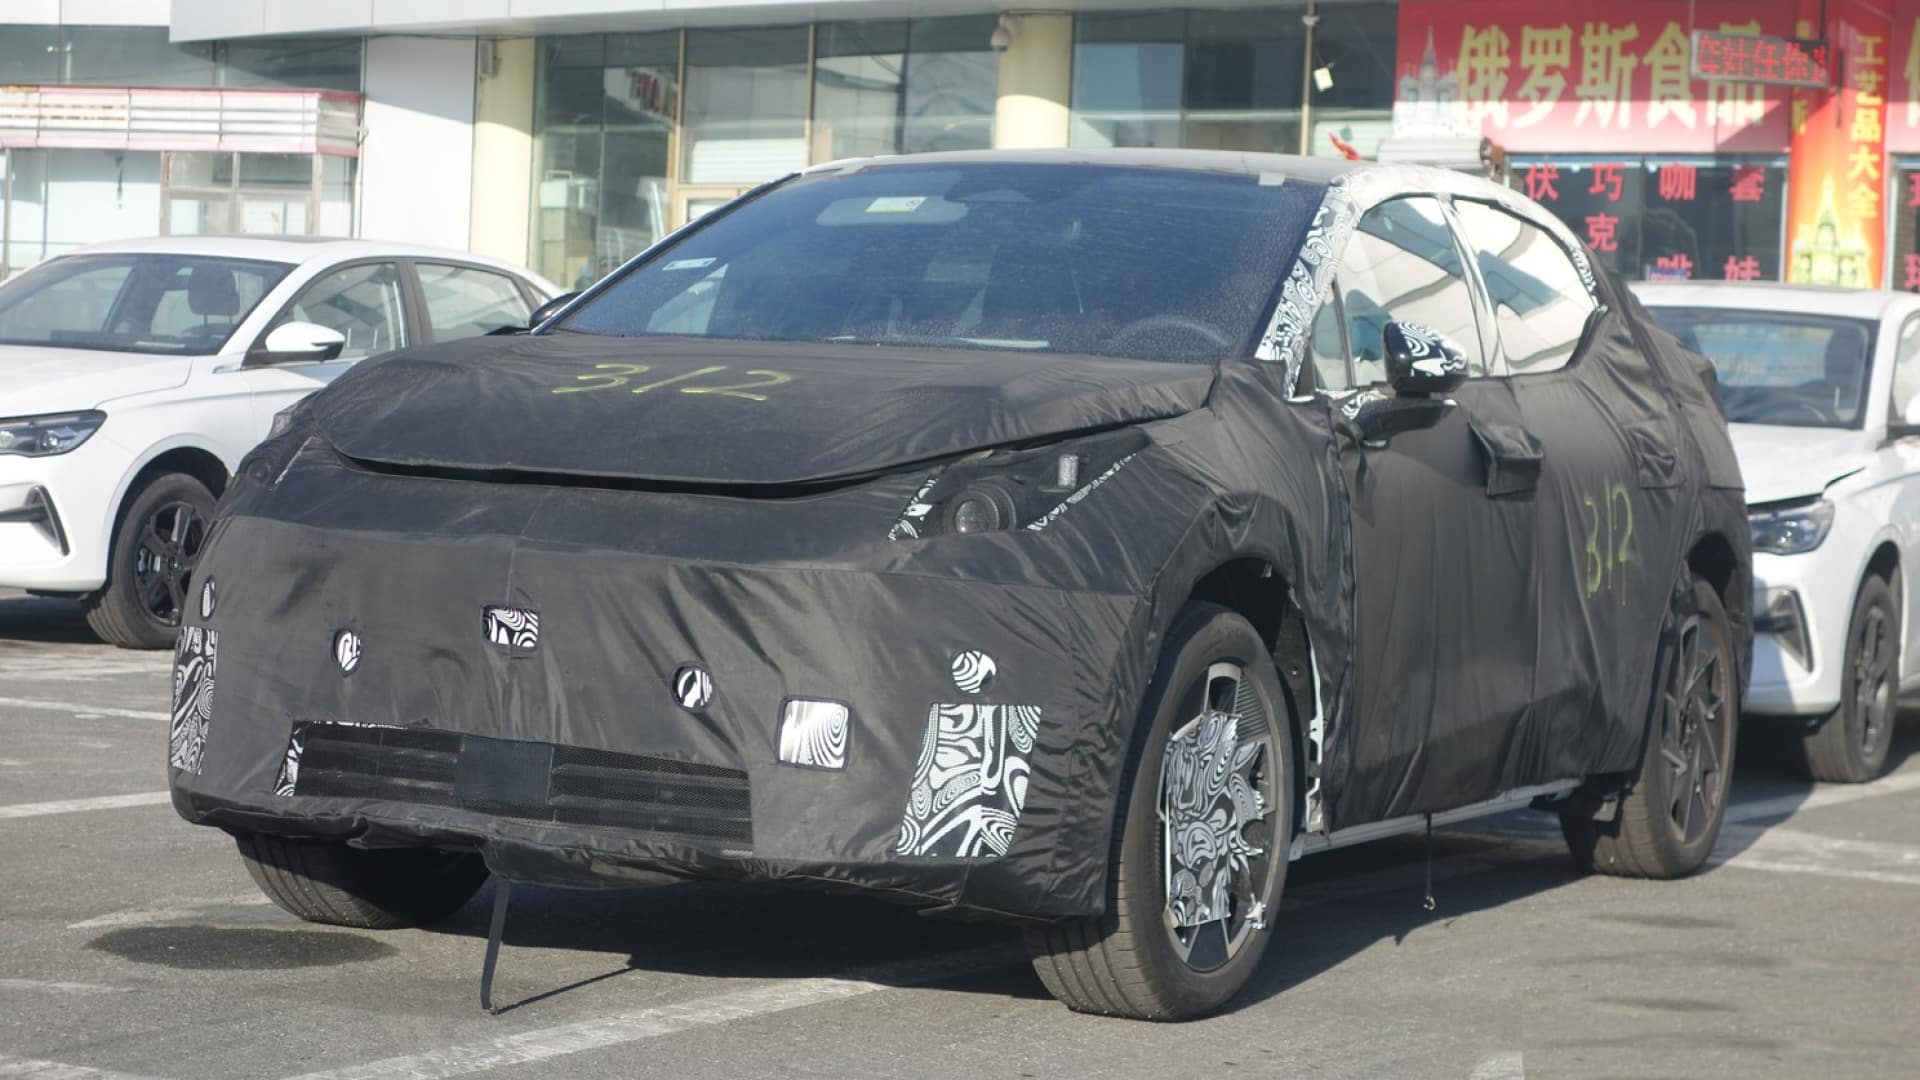 SEA-based Lynk & Co 02 BEV for Europe spotted in China